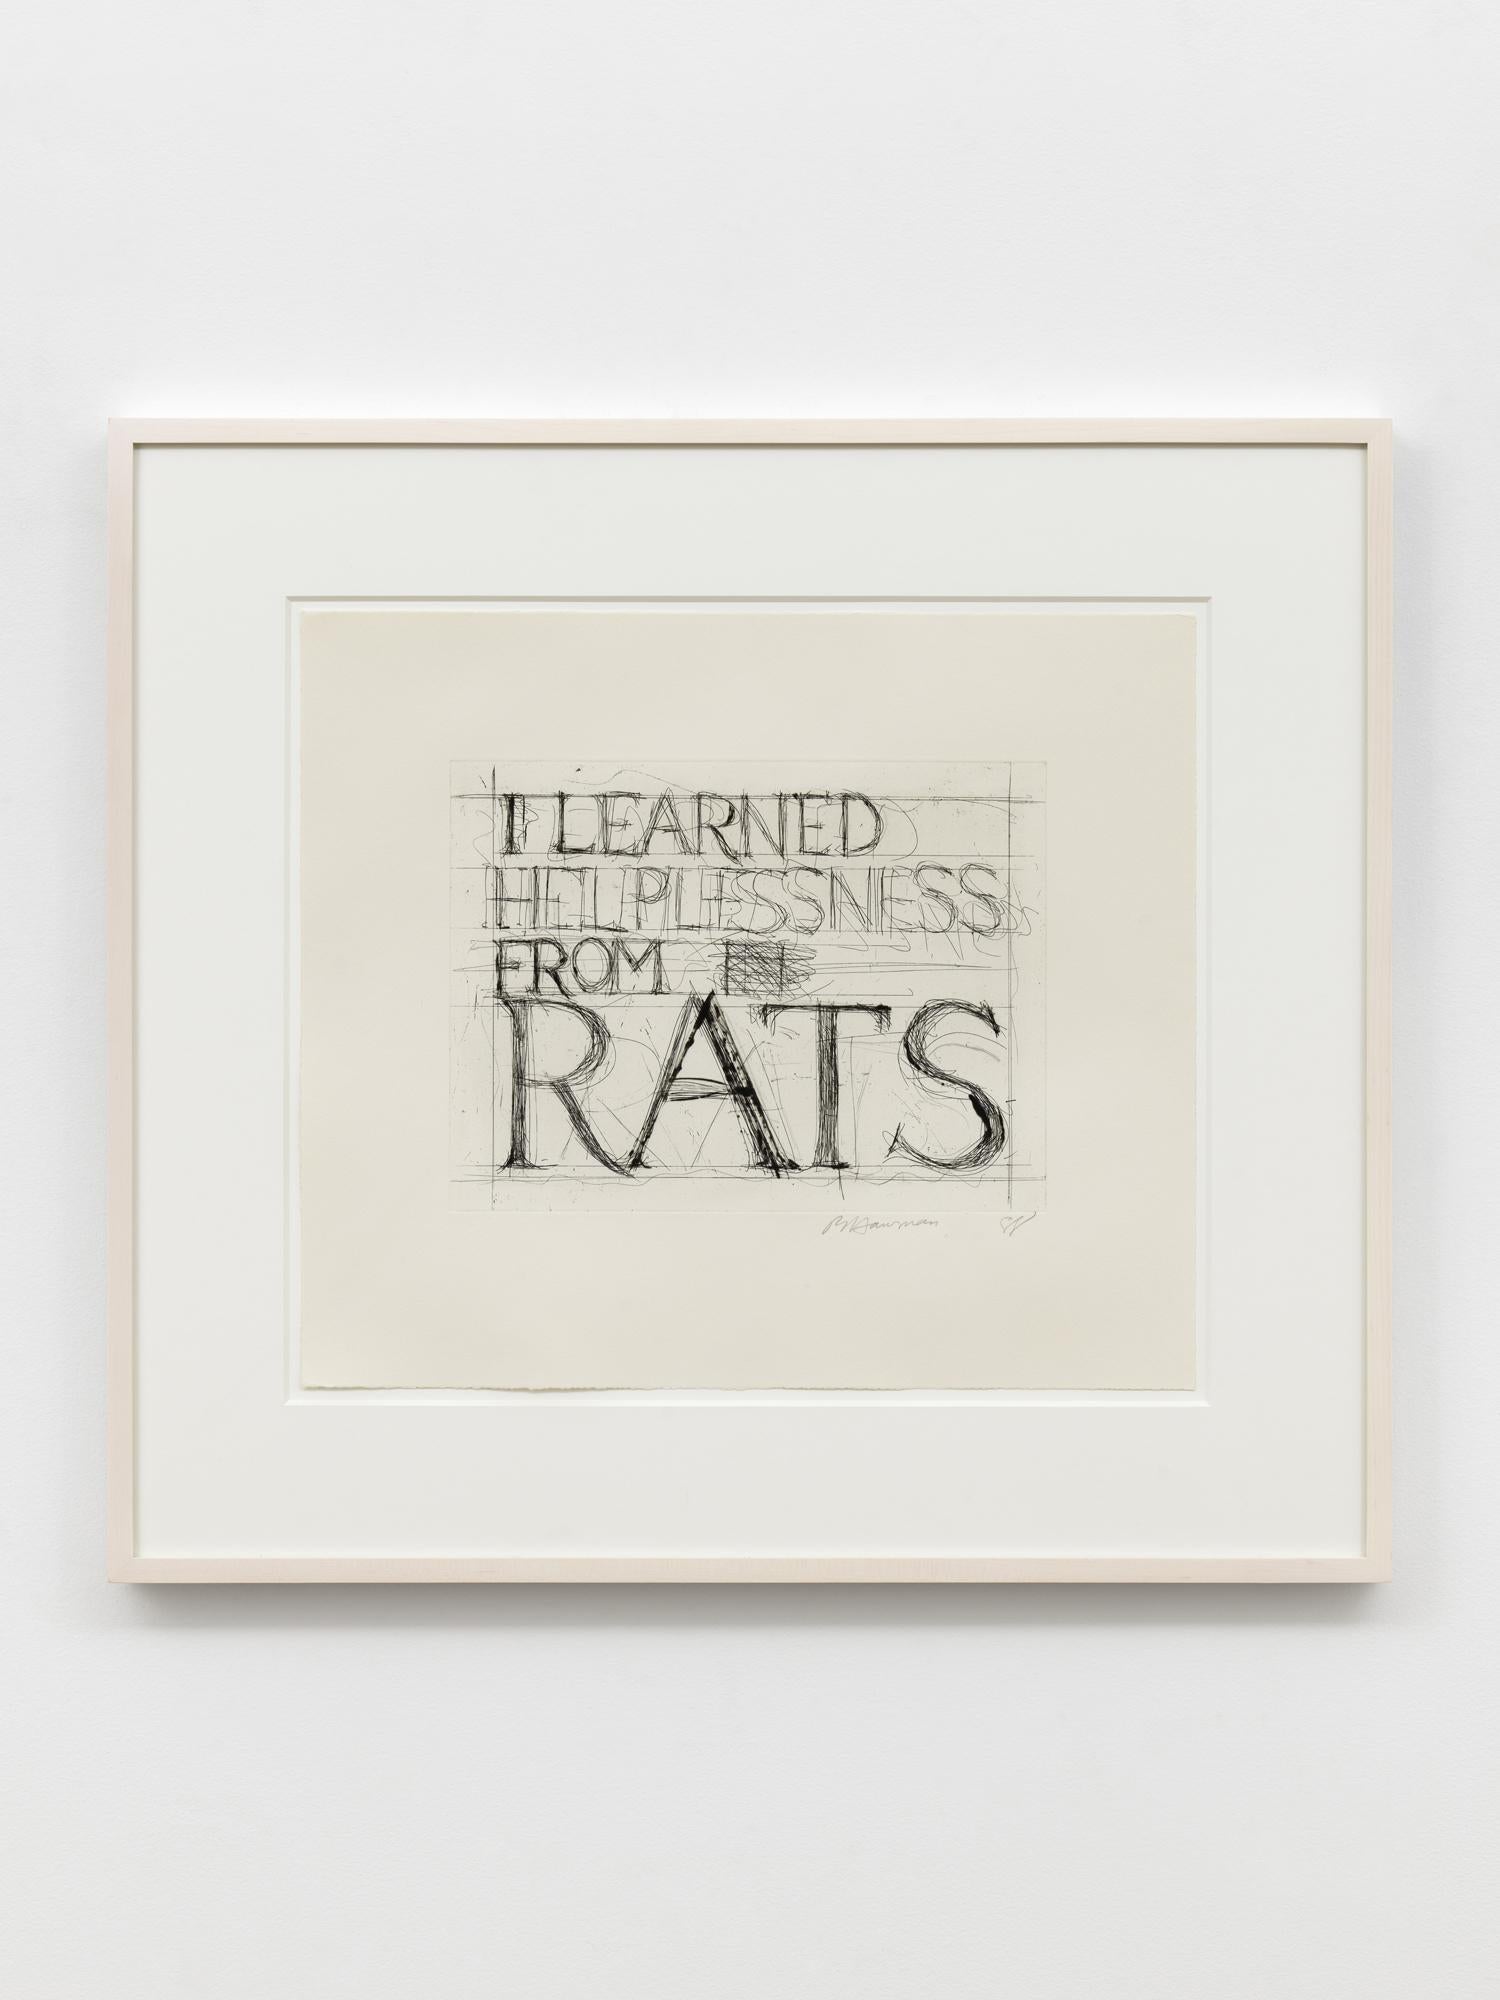 I Learned Helplessness from Rats - Print by Bruce Nauman